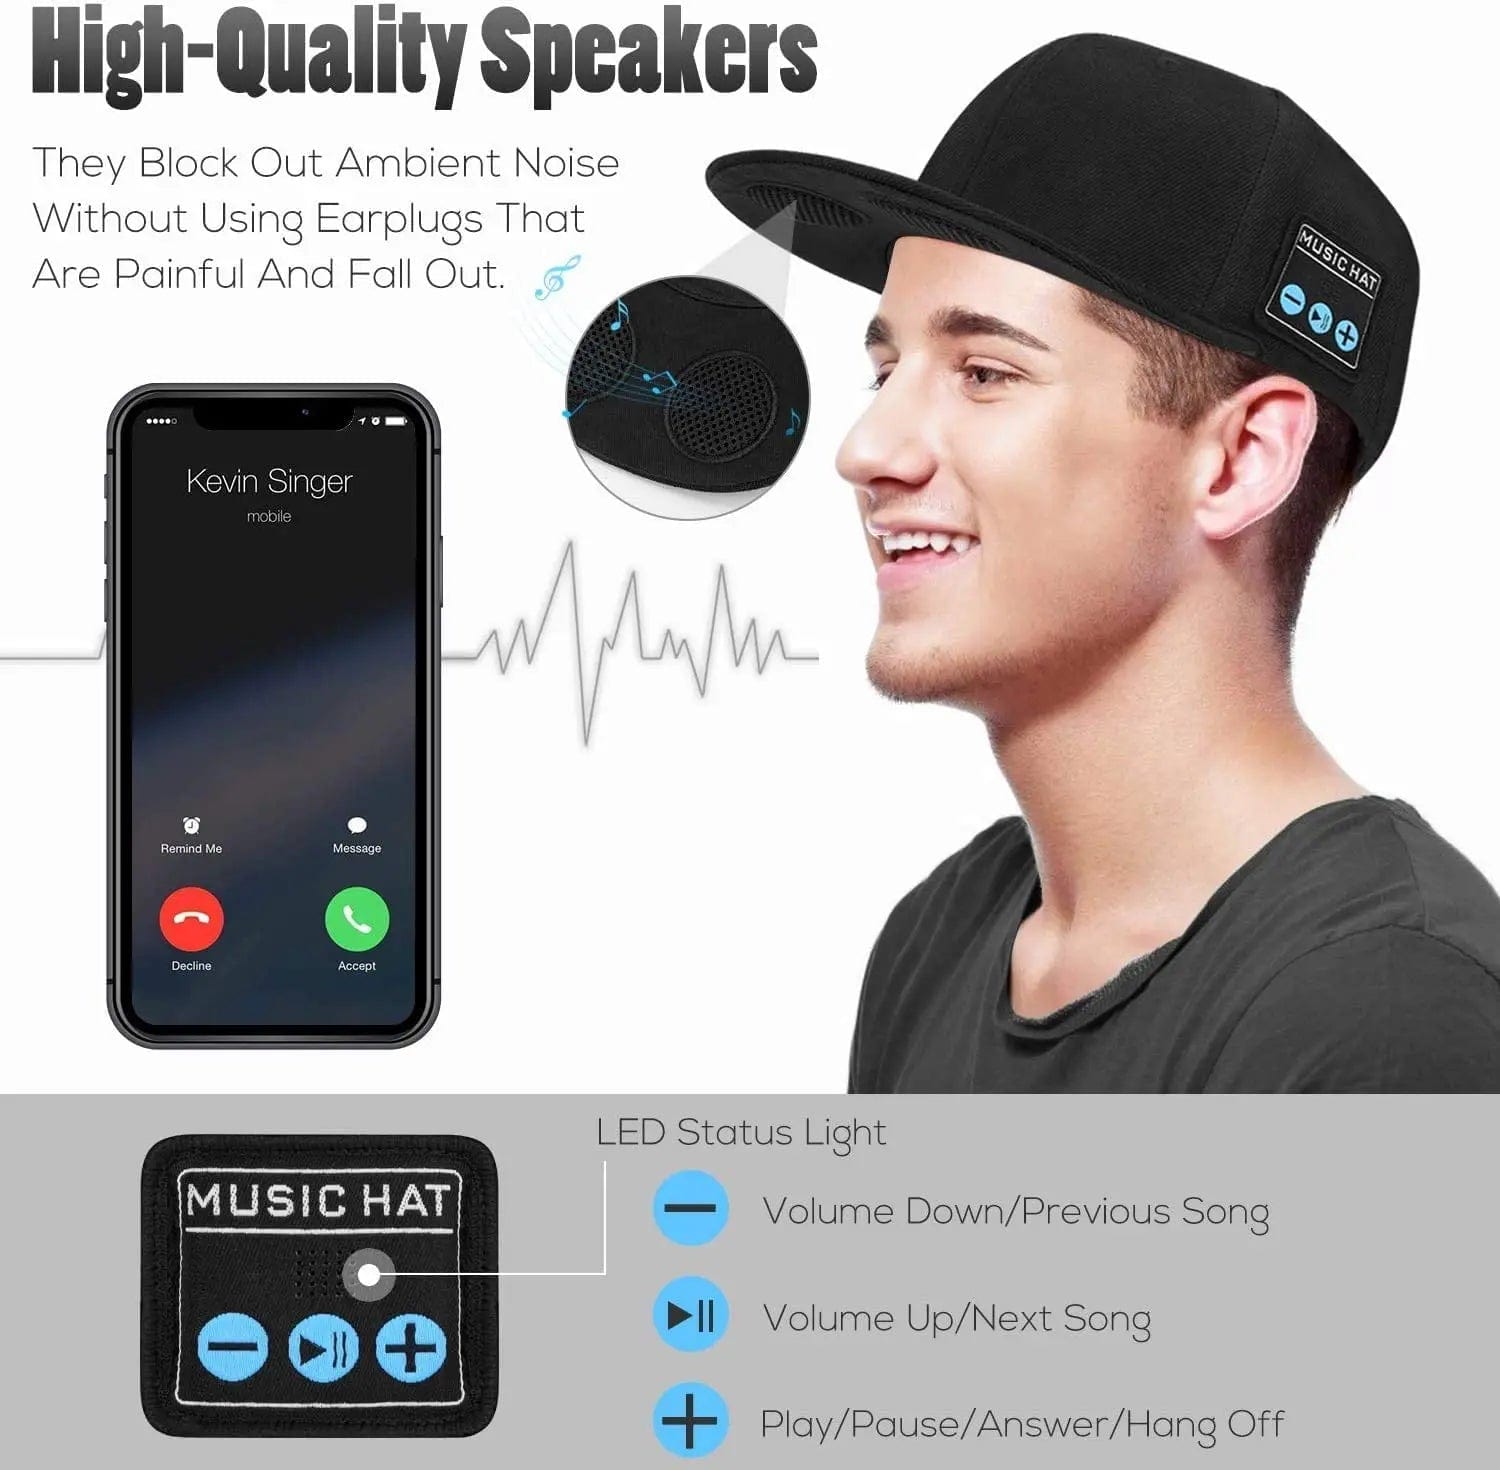 HomeBound Essentials Bluetooth Speaker Baseball Cap - Adjustable Hat with Mic for Wireless Music and Calls